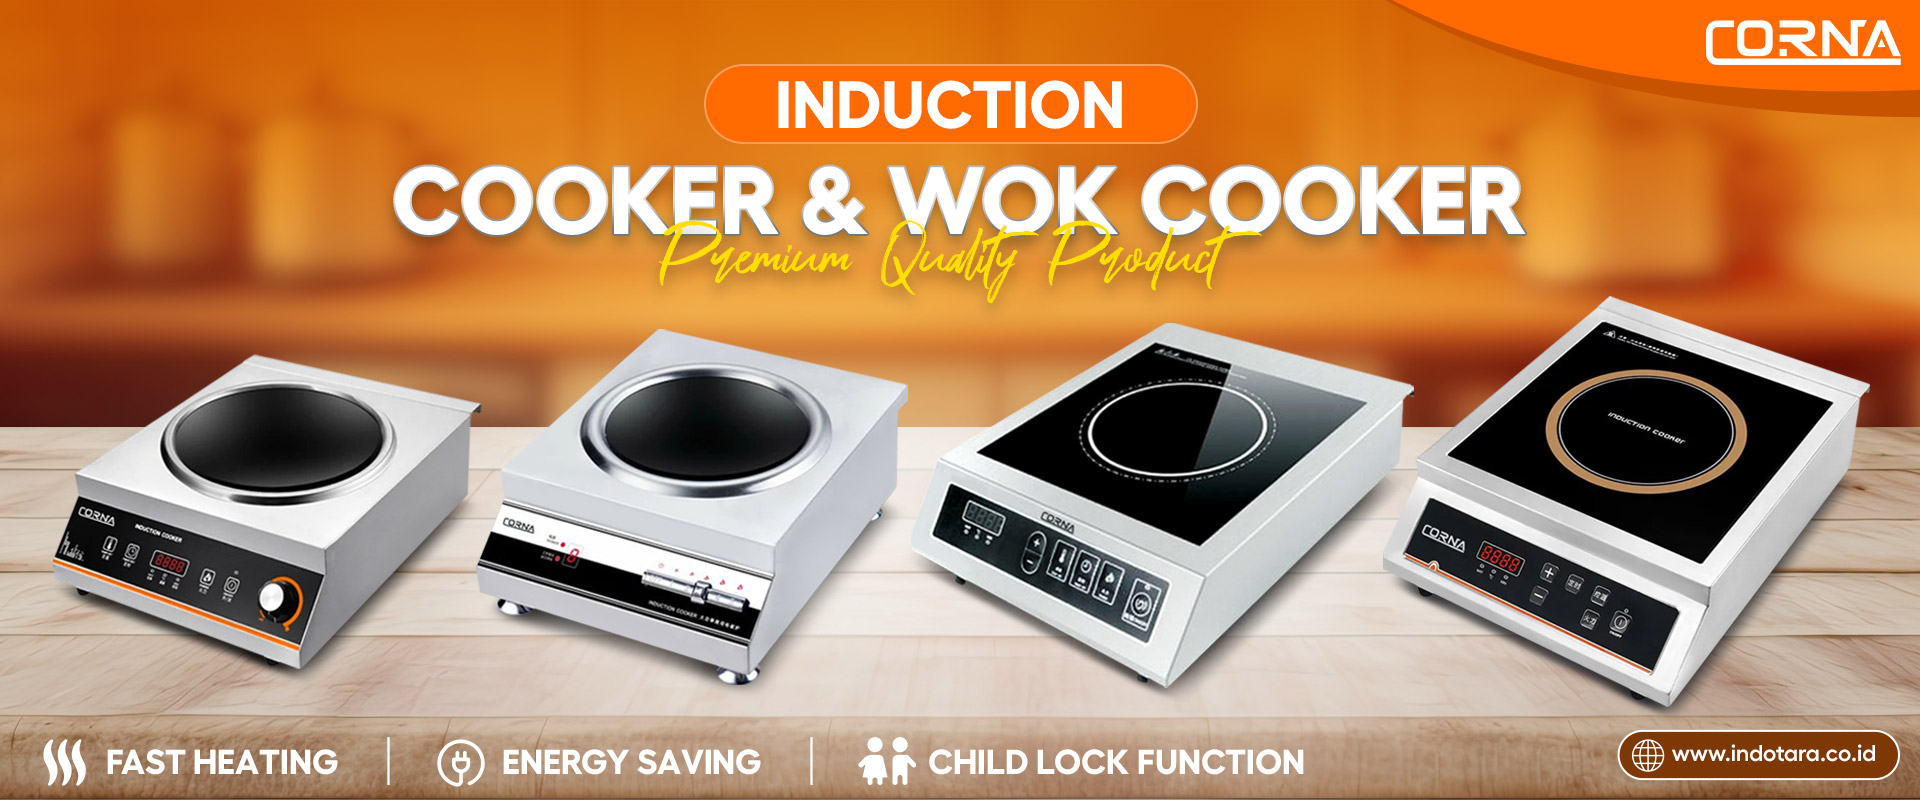 Corna Induction Cooker and Wok Cooker Equipment